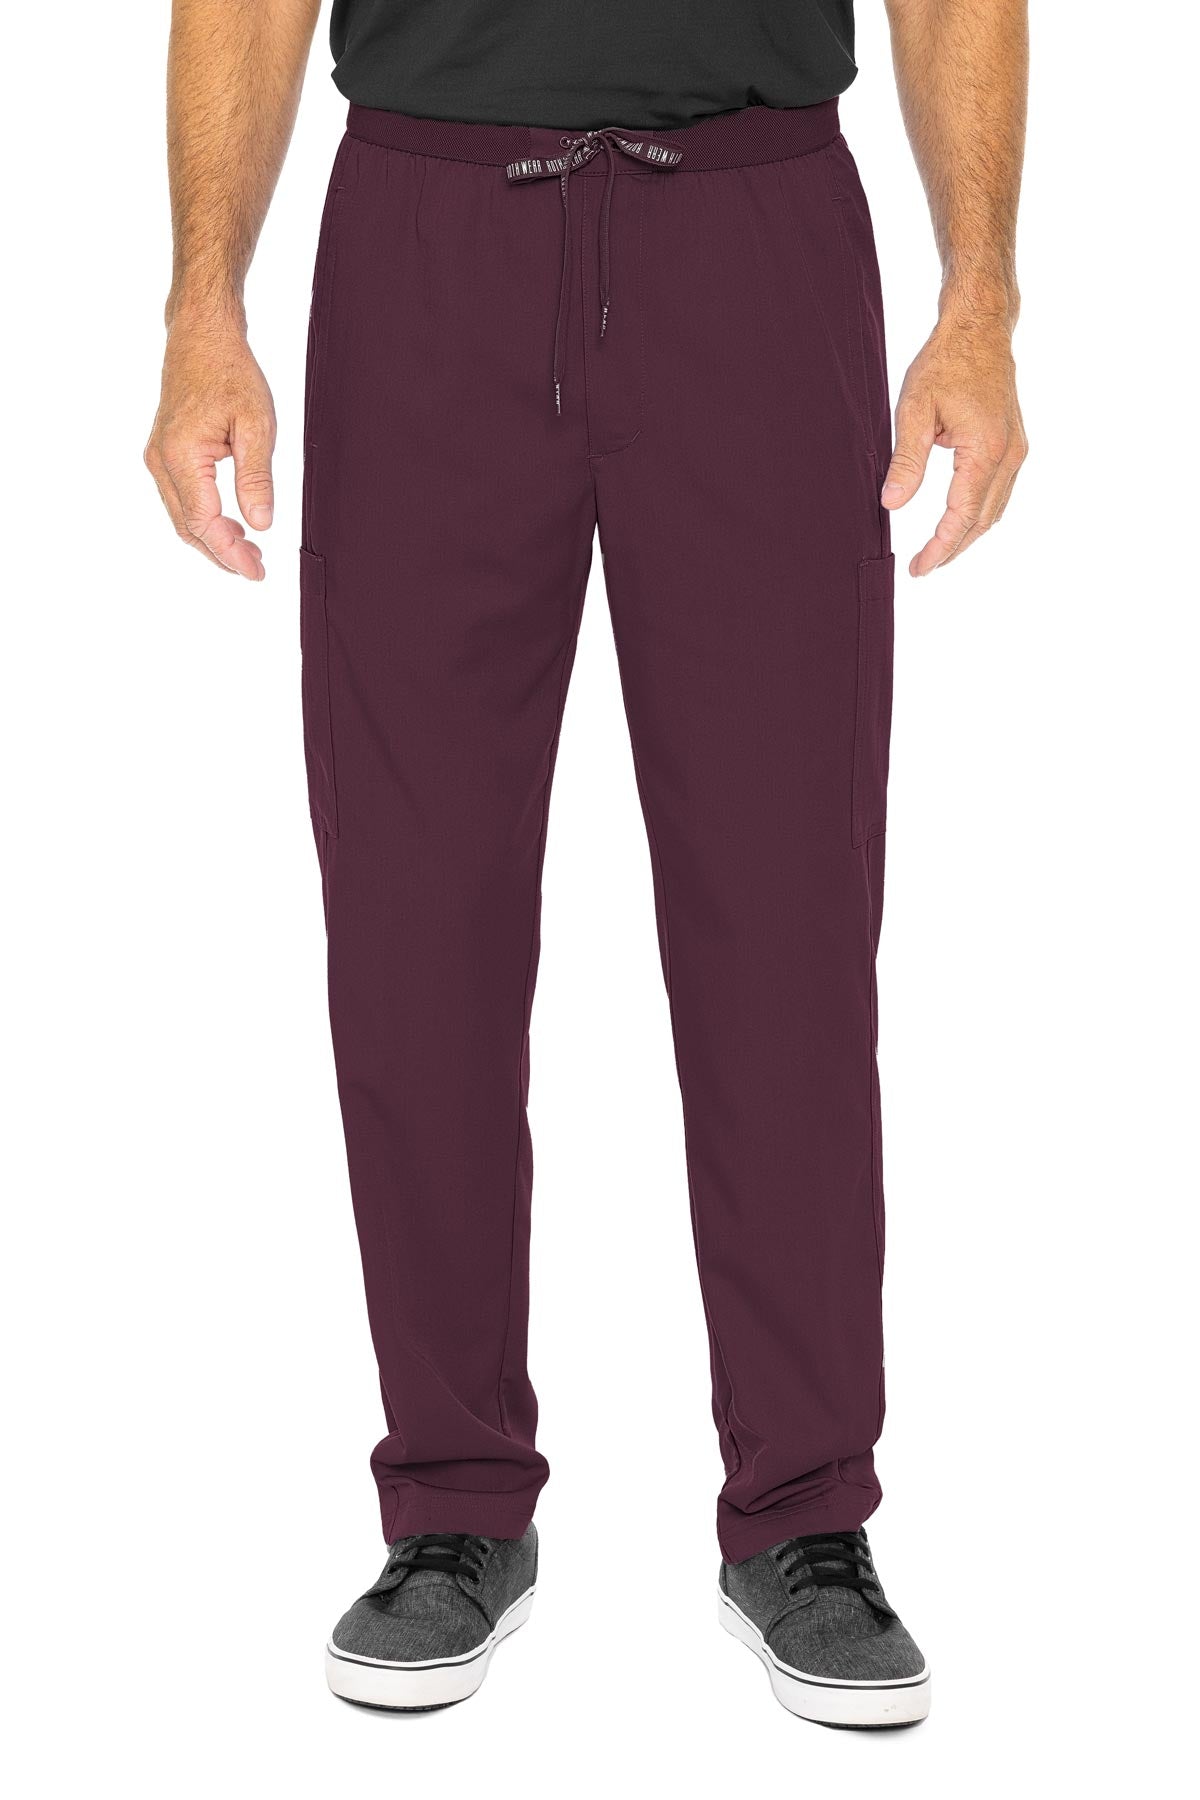 MED COUTURE Hutton Straight Leg Pant